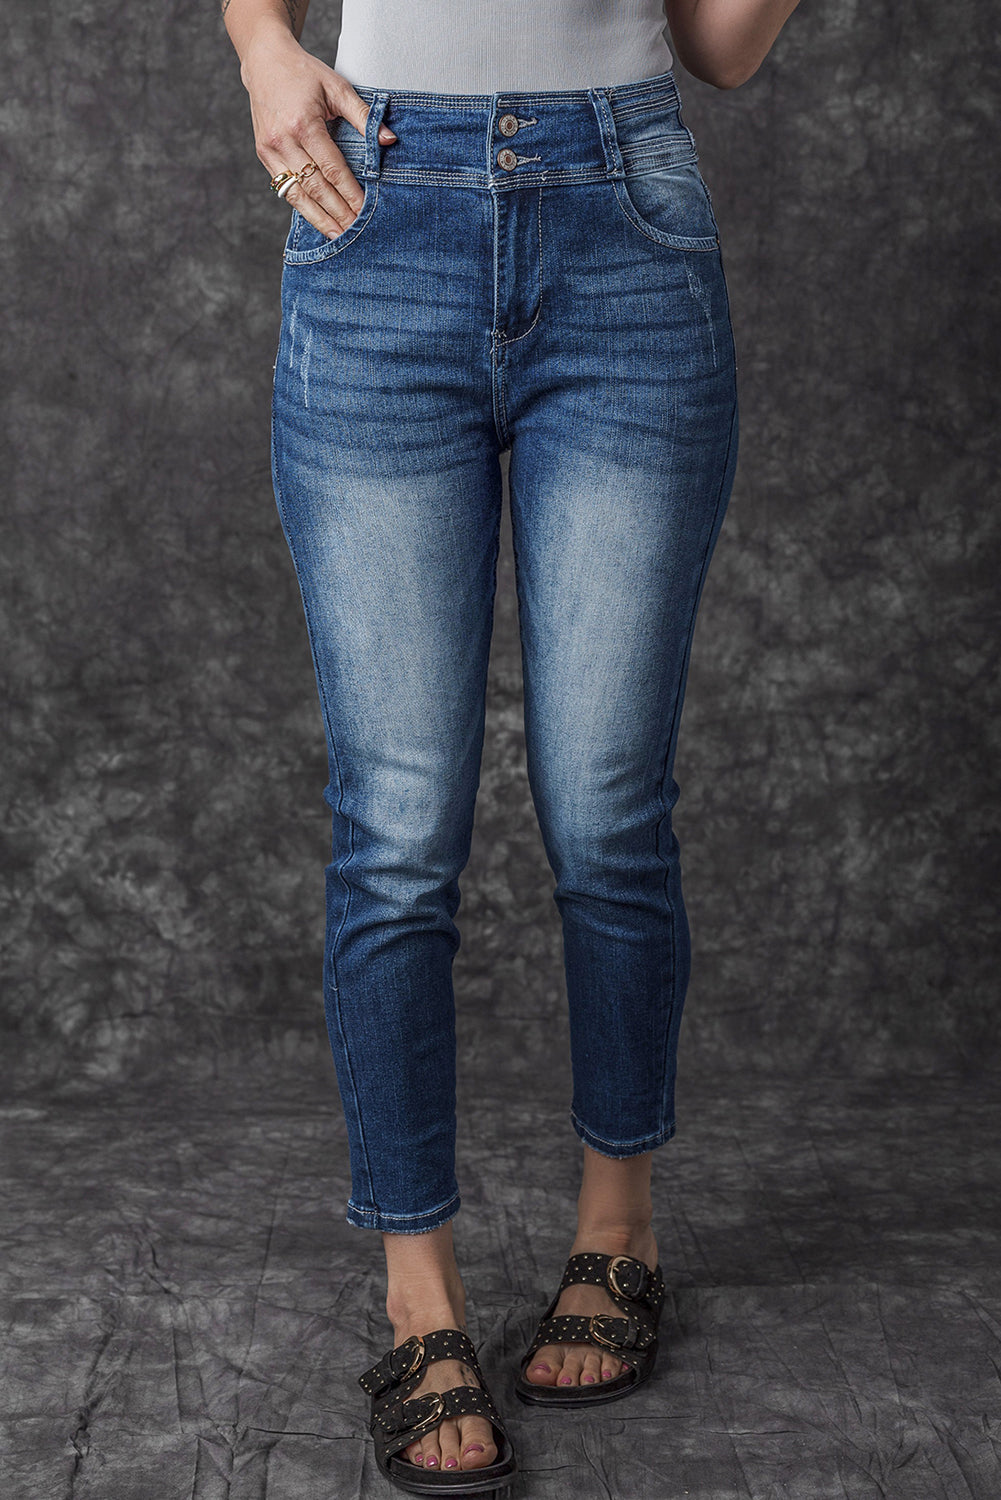 Blue 71%Cotton+27.5%Polyester+1.5%Elastane - Blue Vintage Washed Two-button High Waist Skinny Jeans - women's jeans at TFC&H Co.